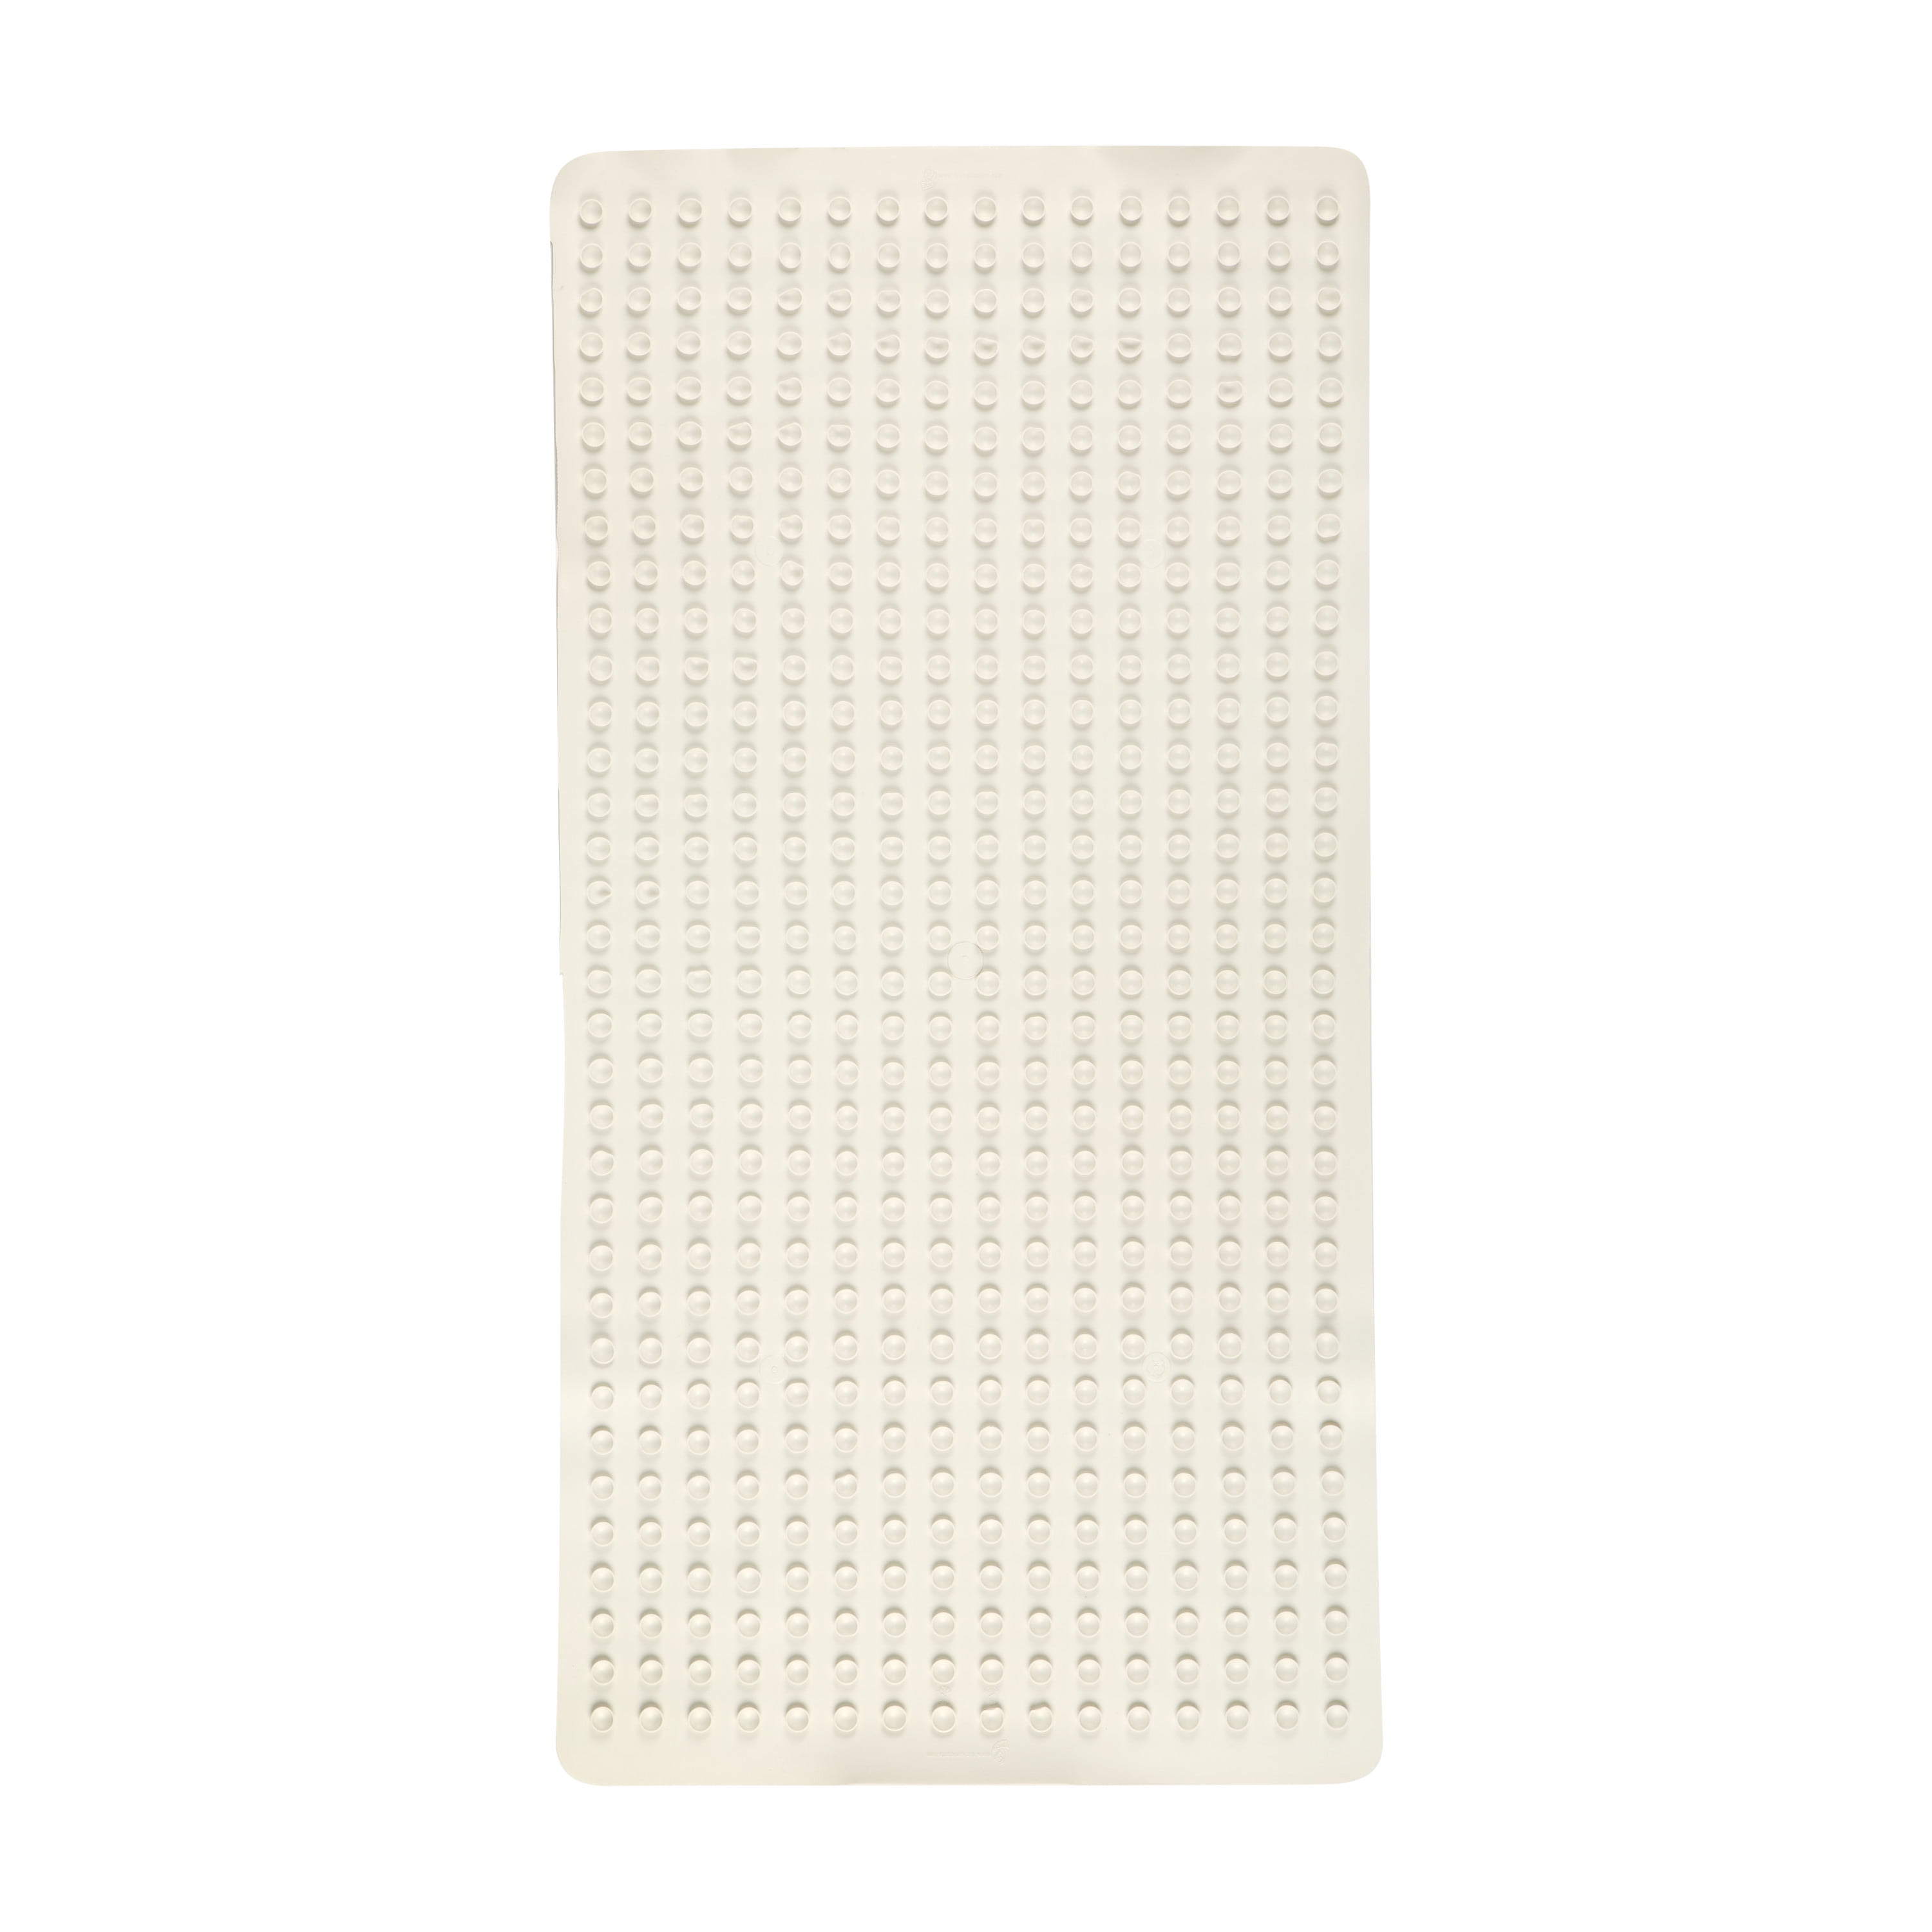 SlipX Solutions 18 in. x 36 in. Extra Long Rubber Bath Safety Mat in White  06600-1 - The Home Depot